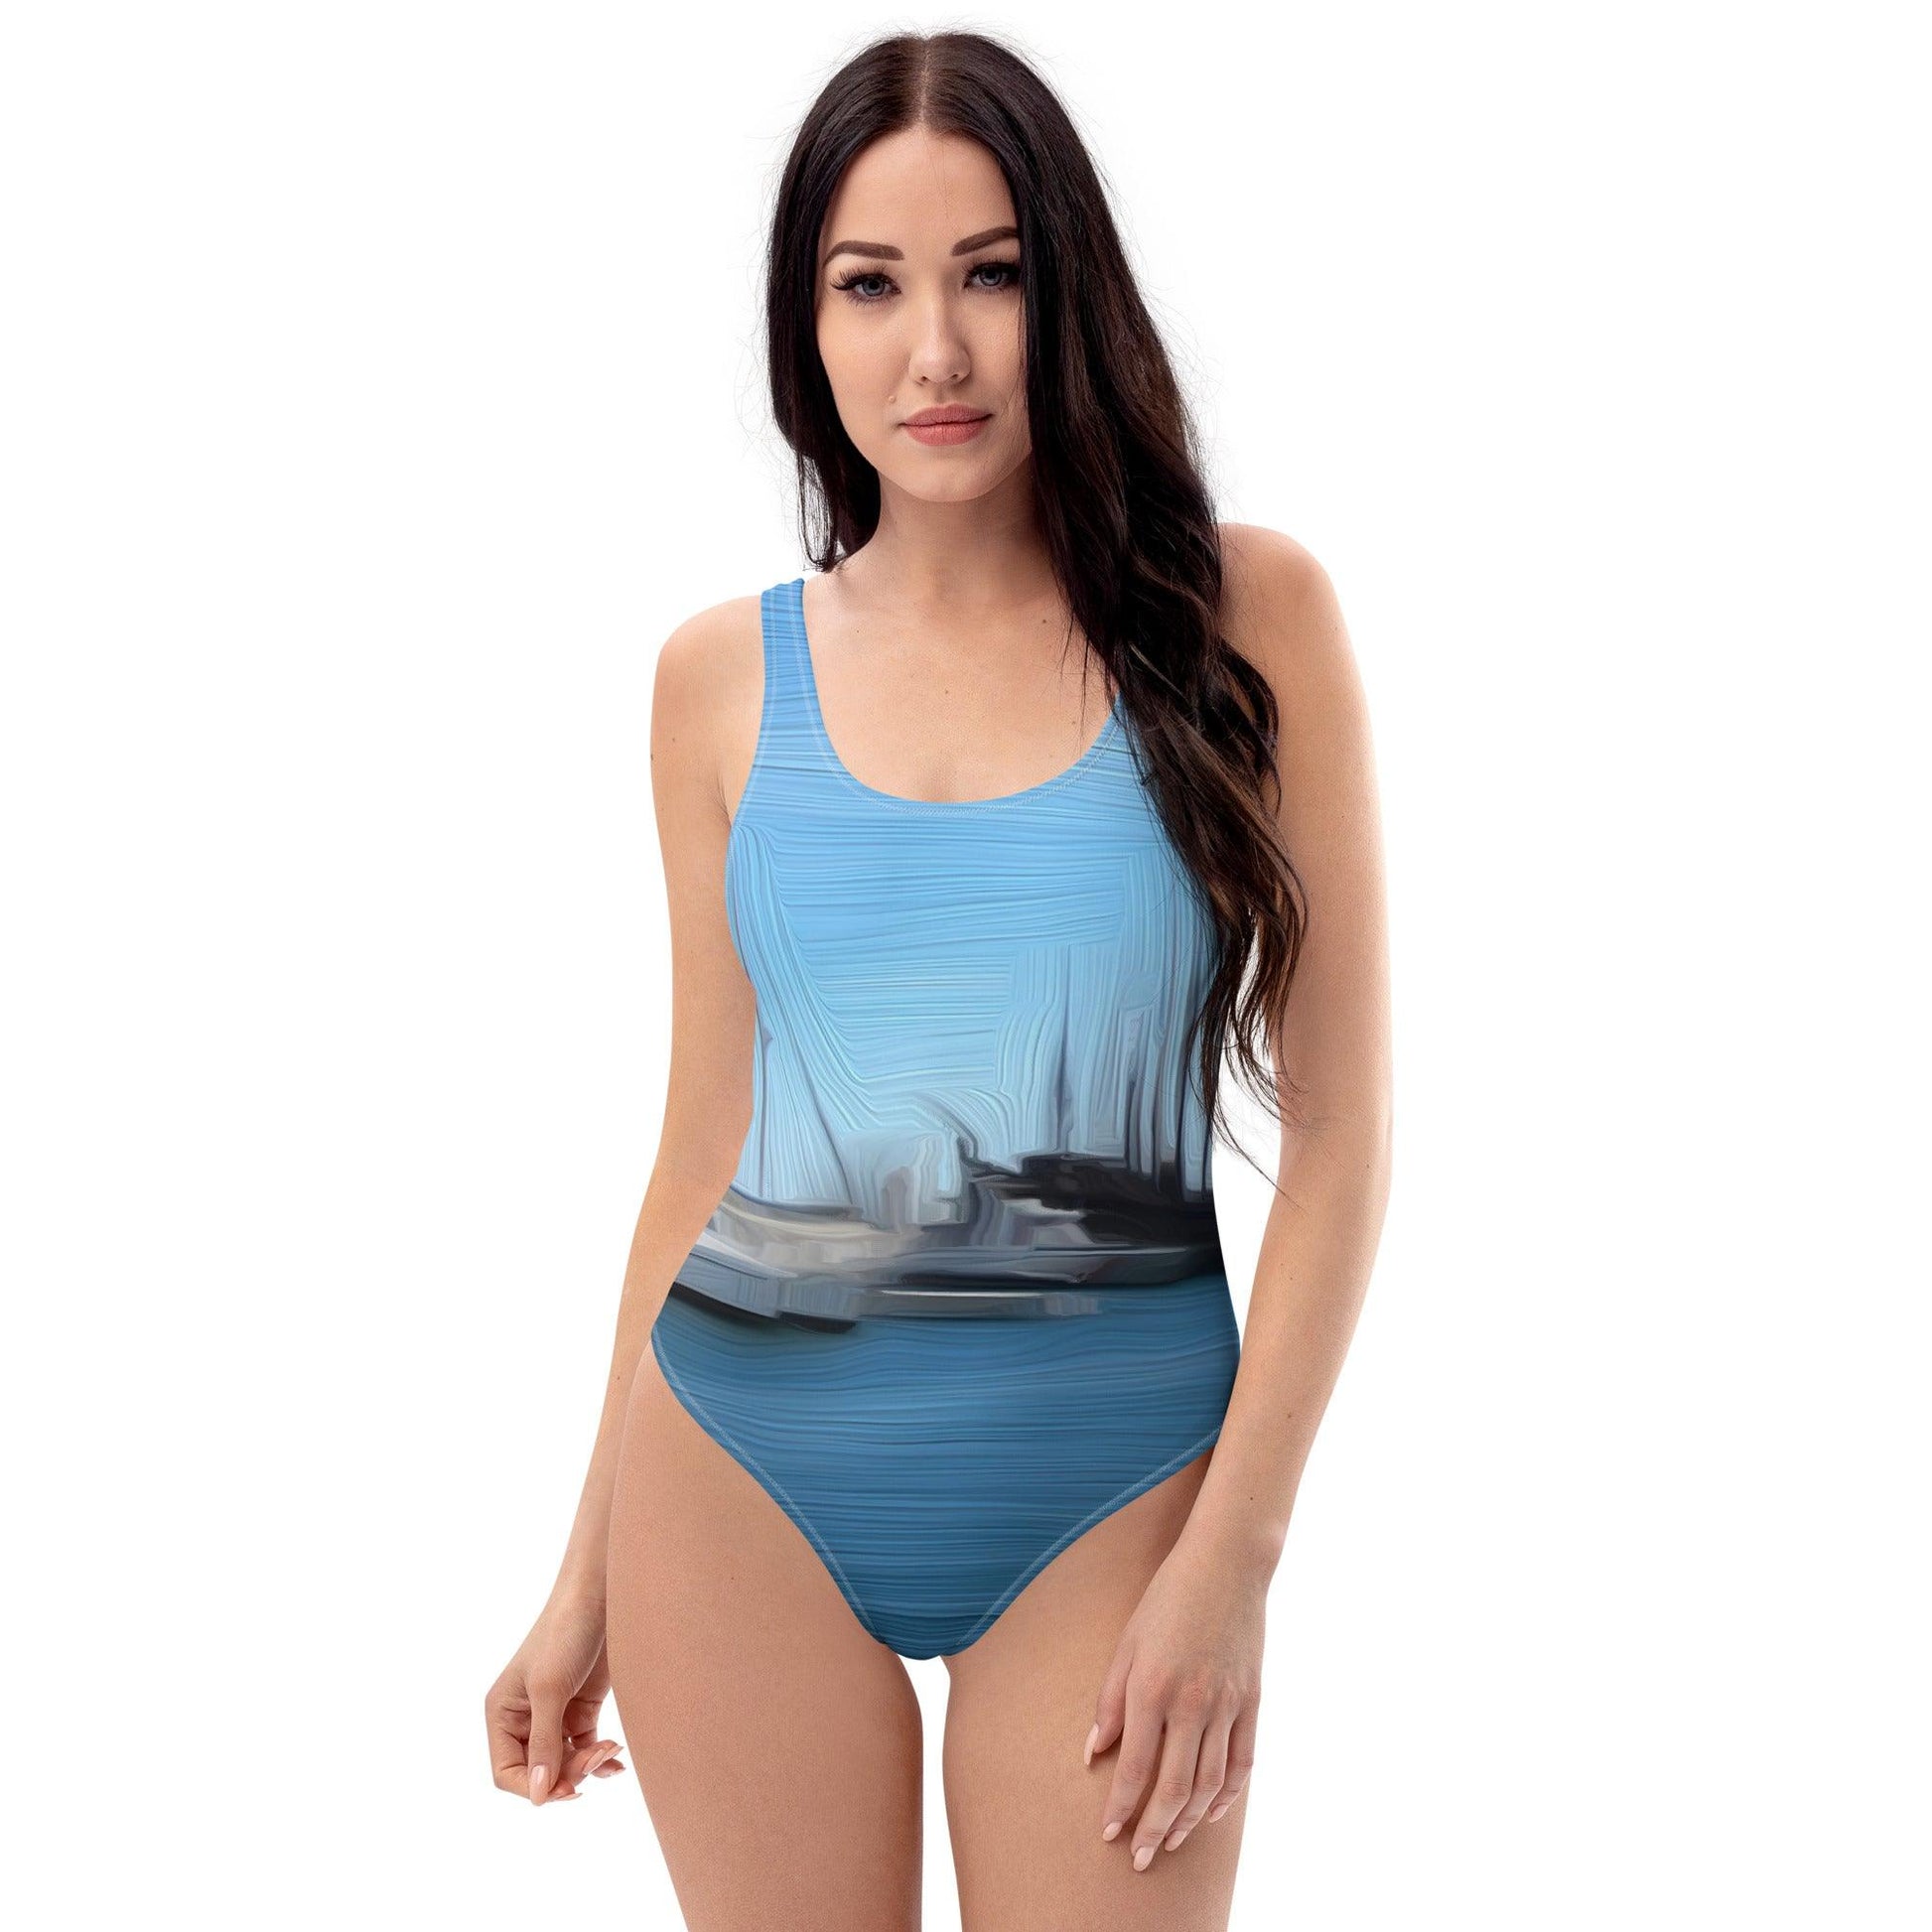 The Sleeping Yachts (at Morning) - Womens One-Piece Swimsuit - iSAW Company